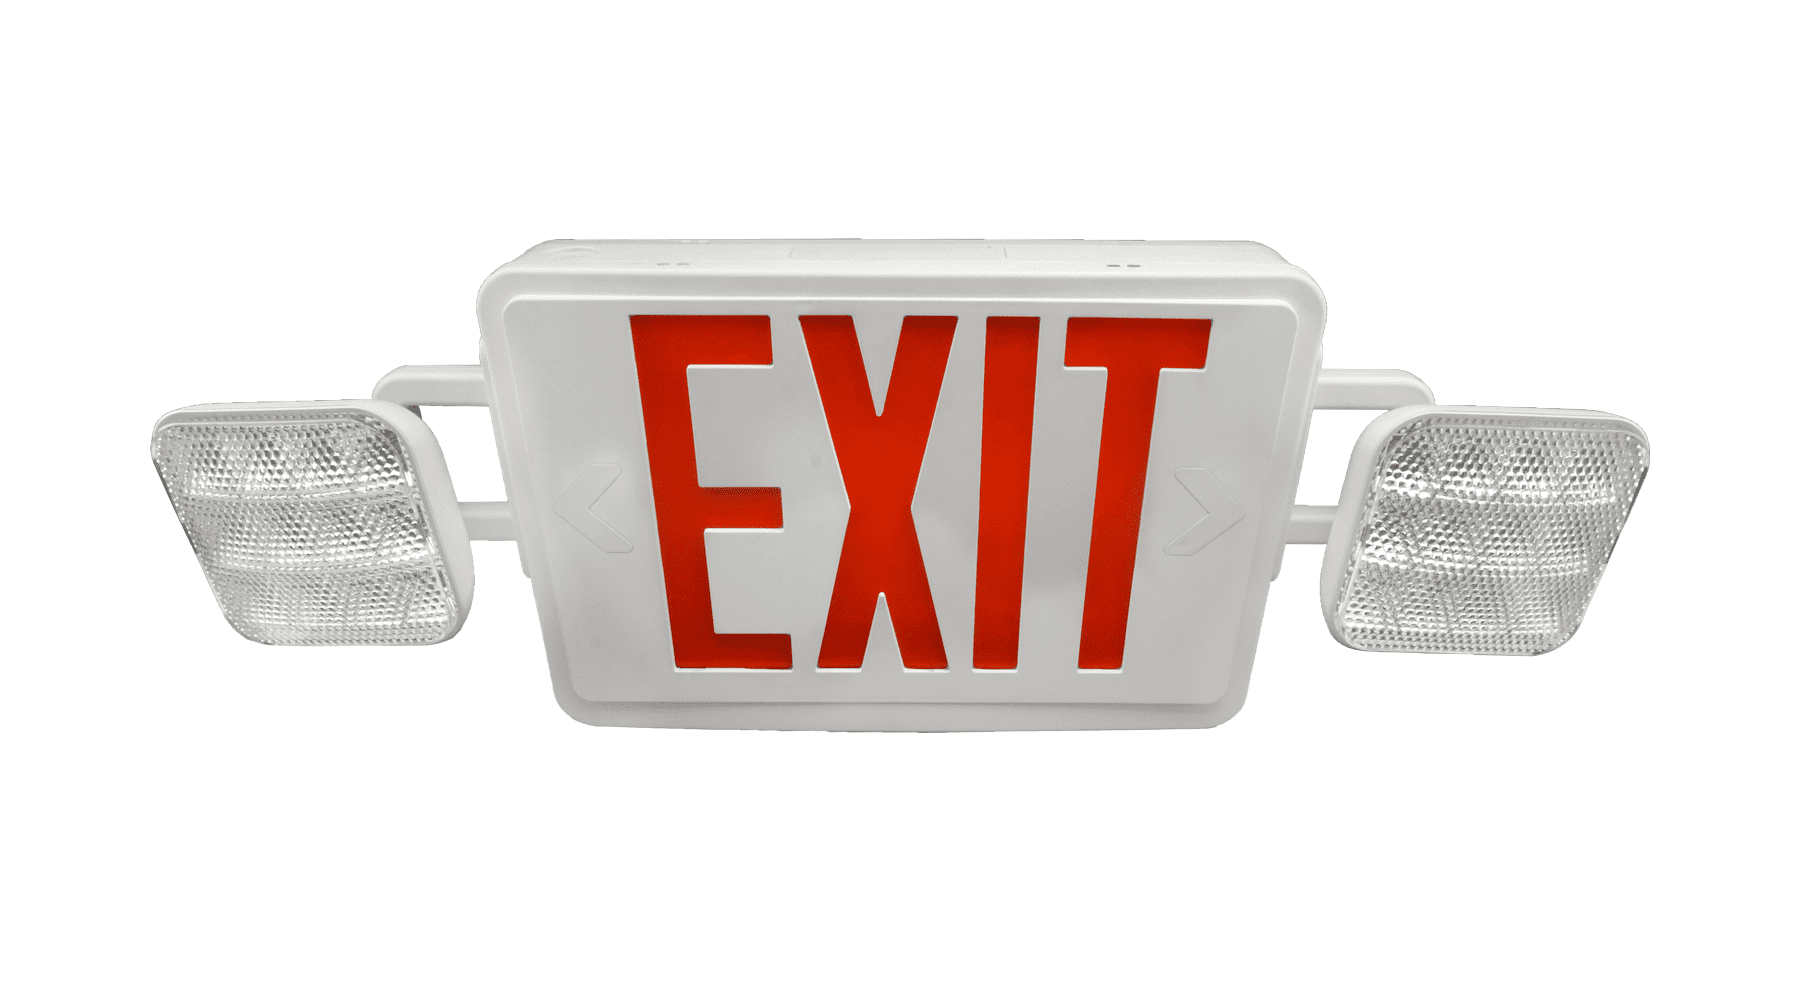 Hardwired Red Compact Combo Exit Sign Emergency Egress Light High Output COMBORJR2 LFI Lights UL Certified